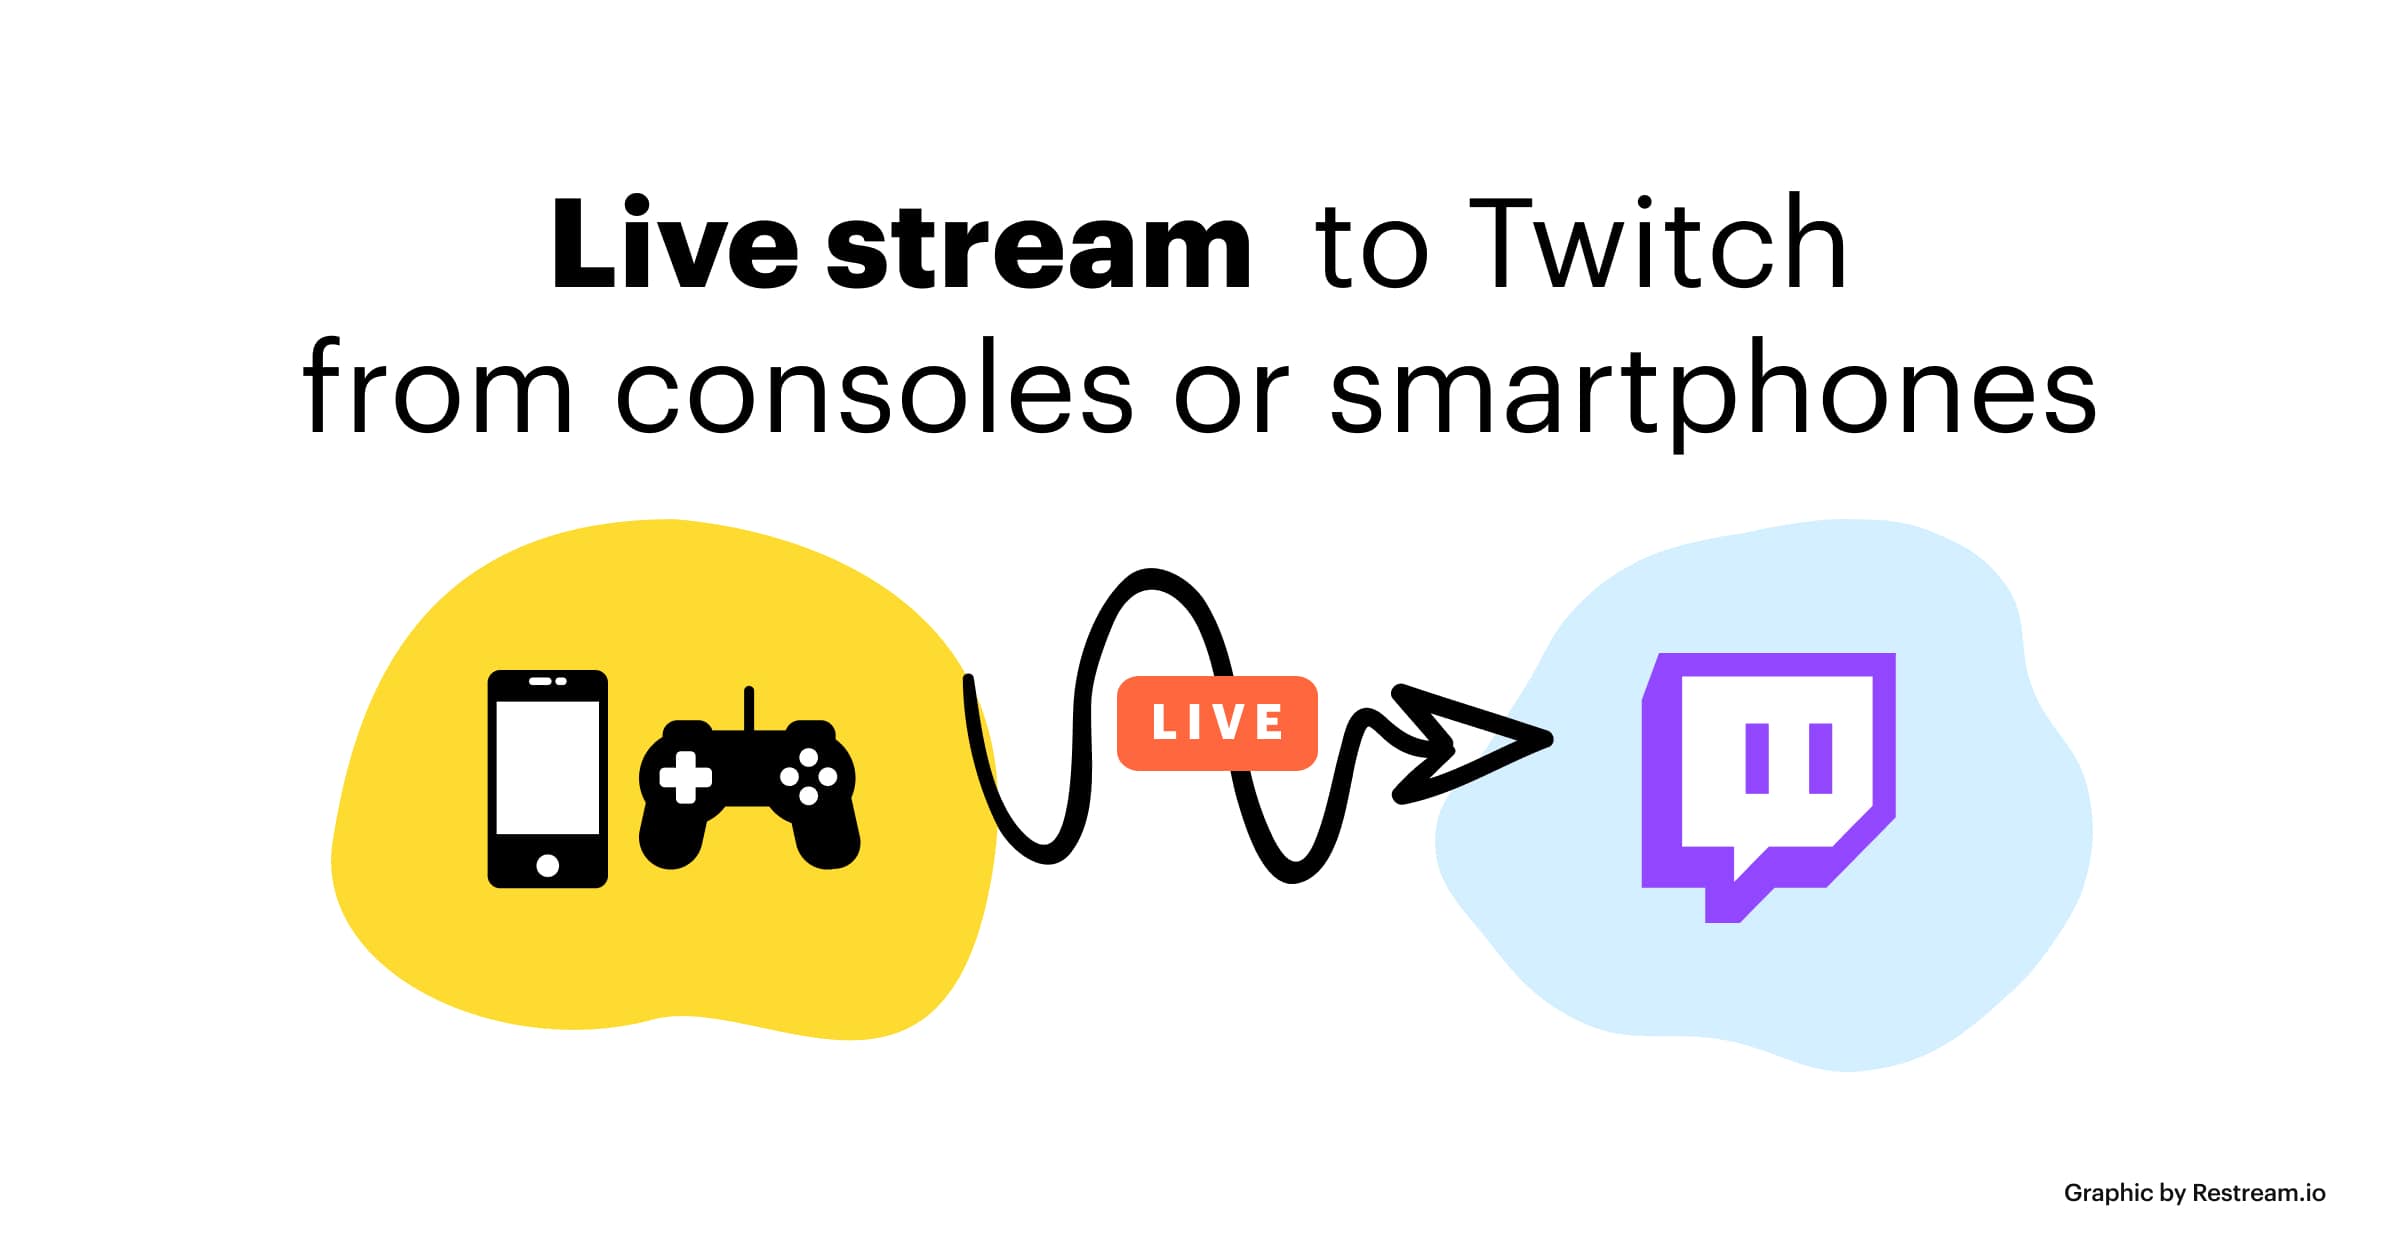 Live stream to Twitch from consoles or smartphones